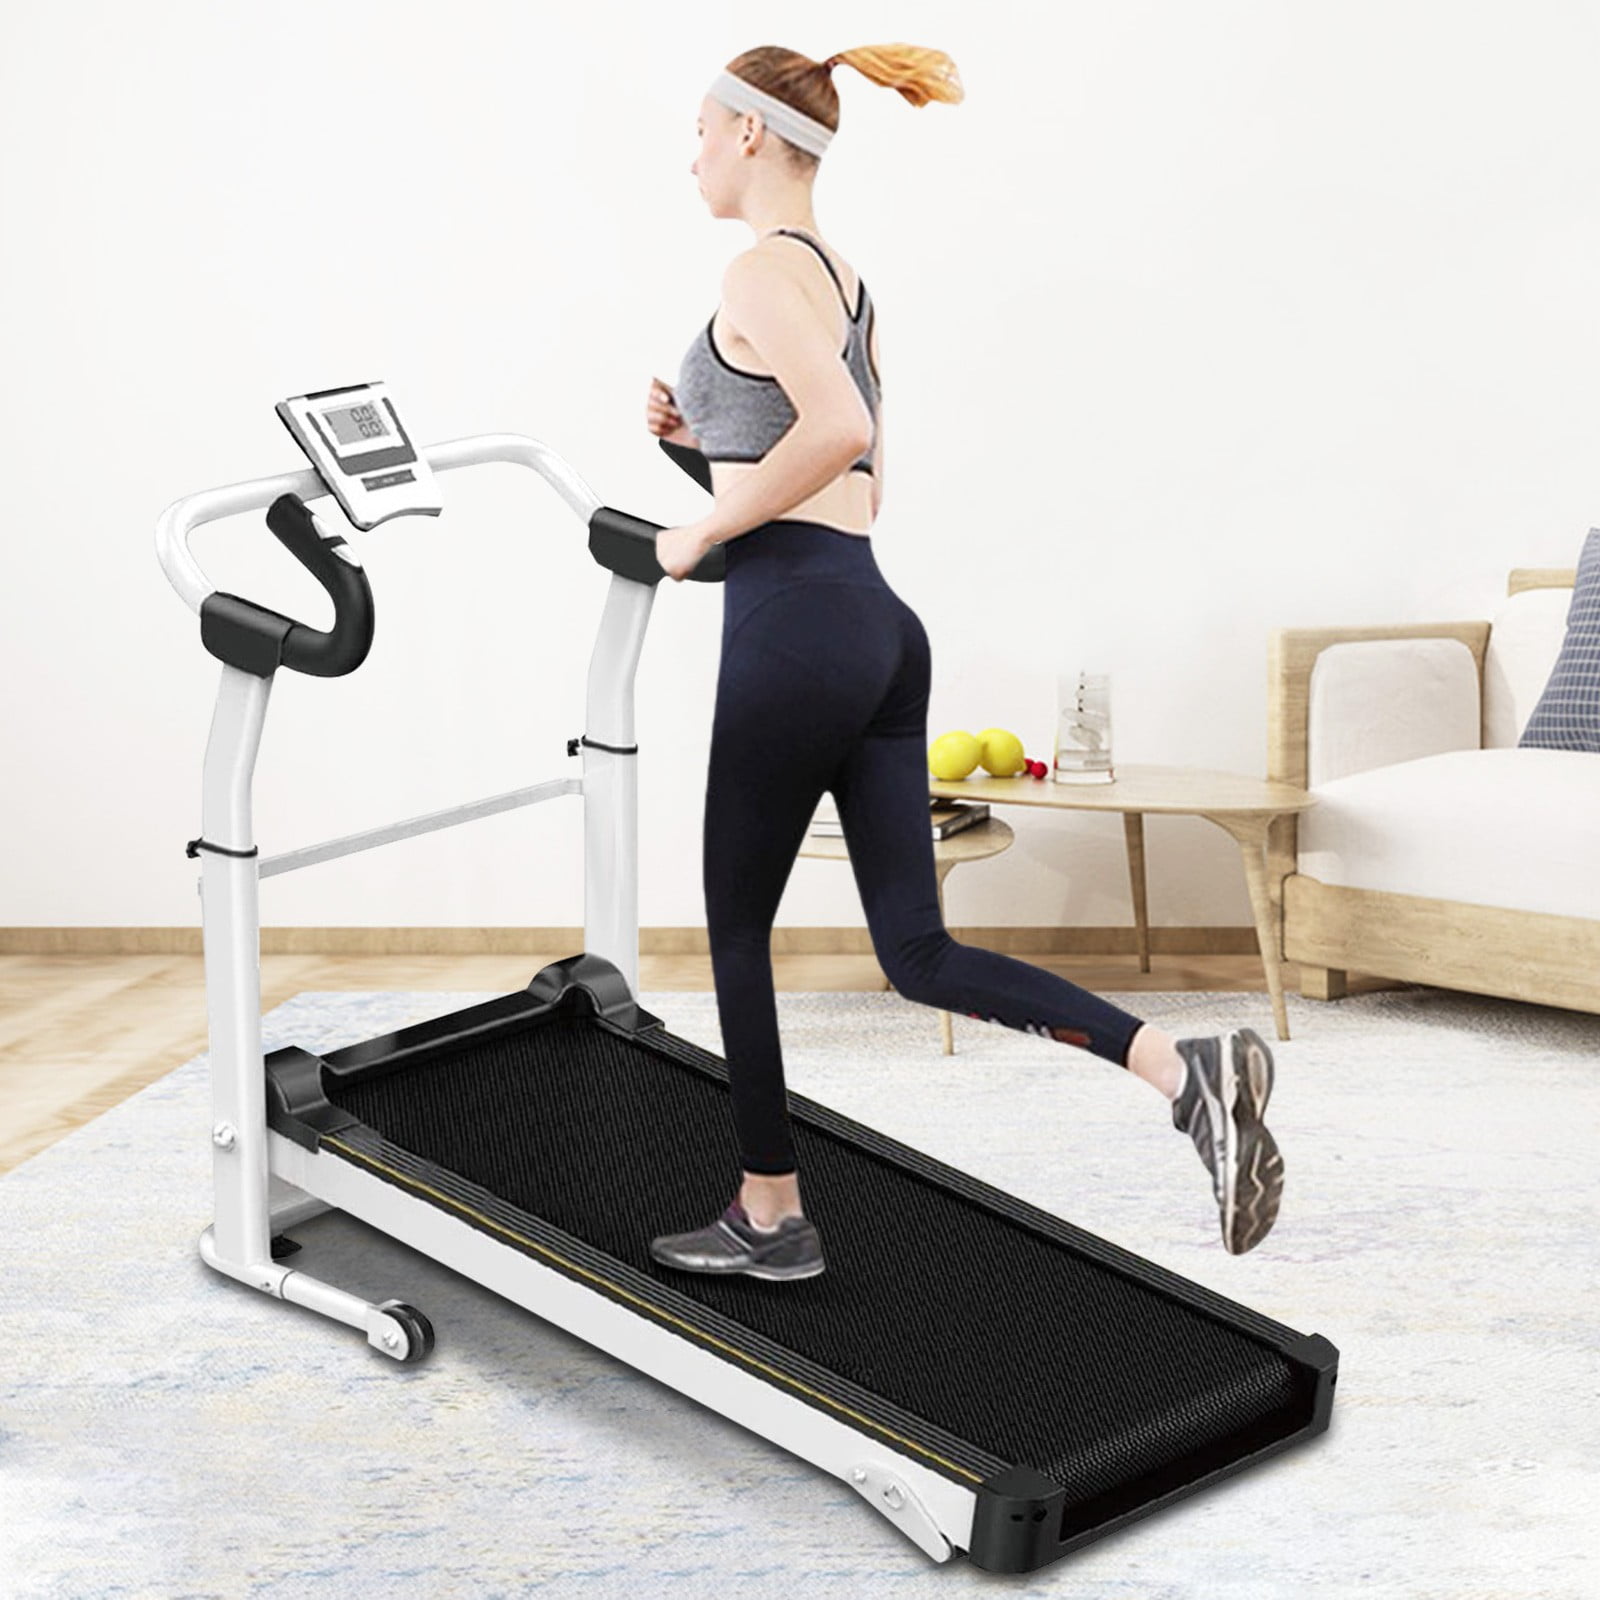 Folding Manual Treadmill Working Machine Cardio Fitness Exercise Incline Home， 